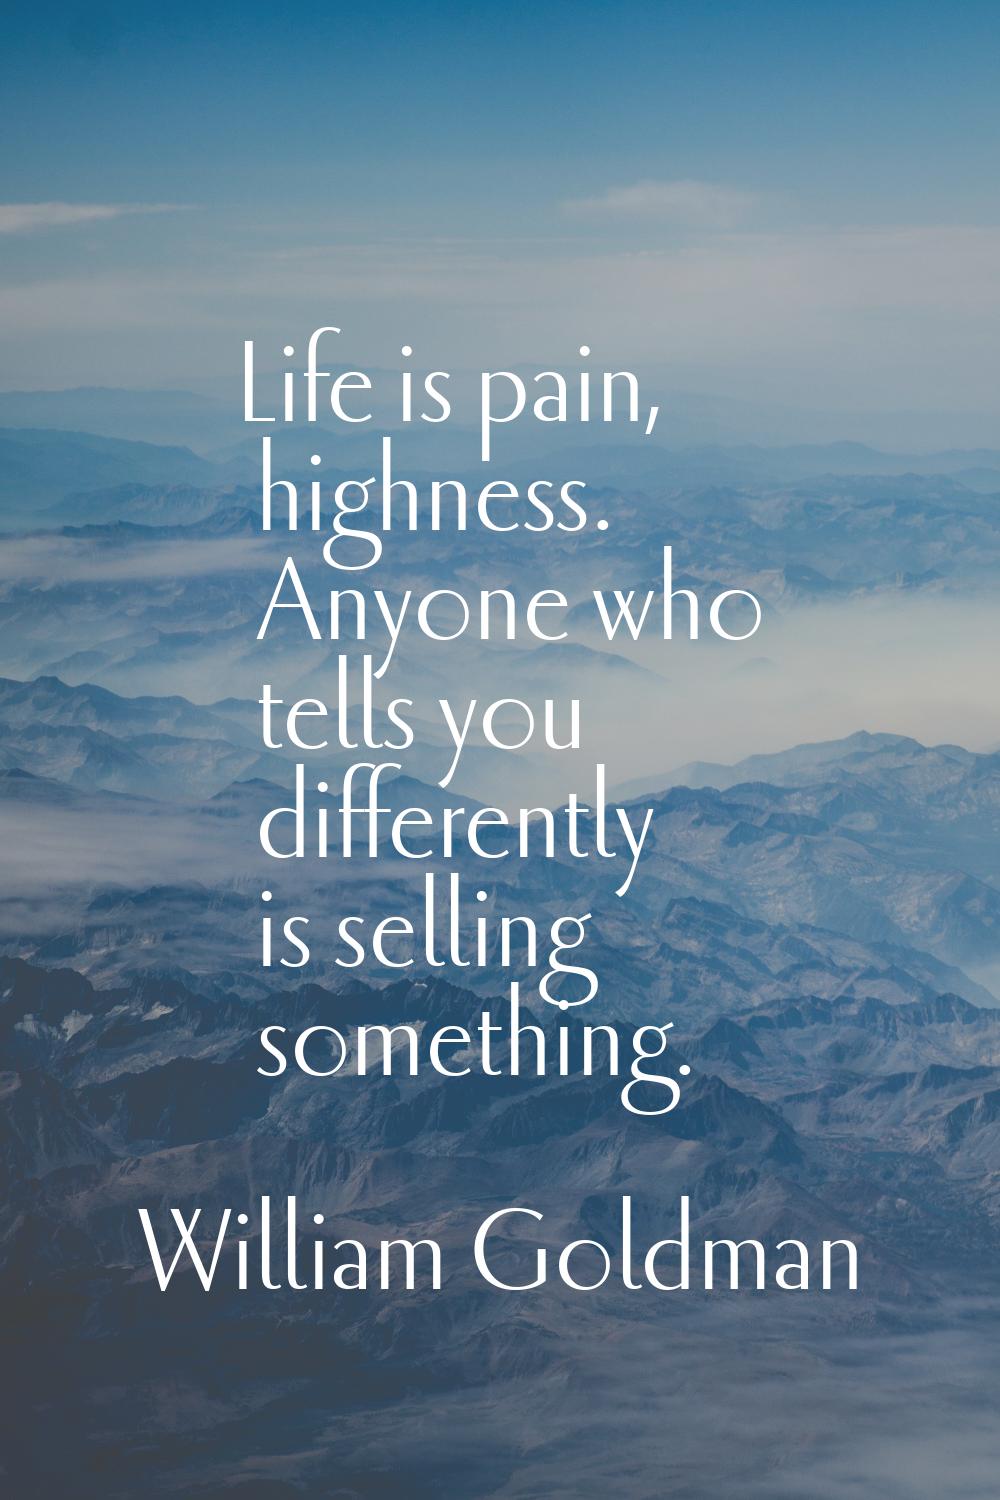 Life is pain, highness. Anyone who tells you differently is selling something.